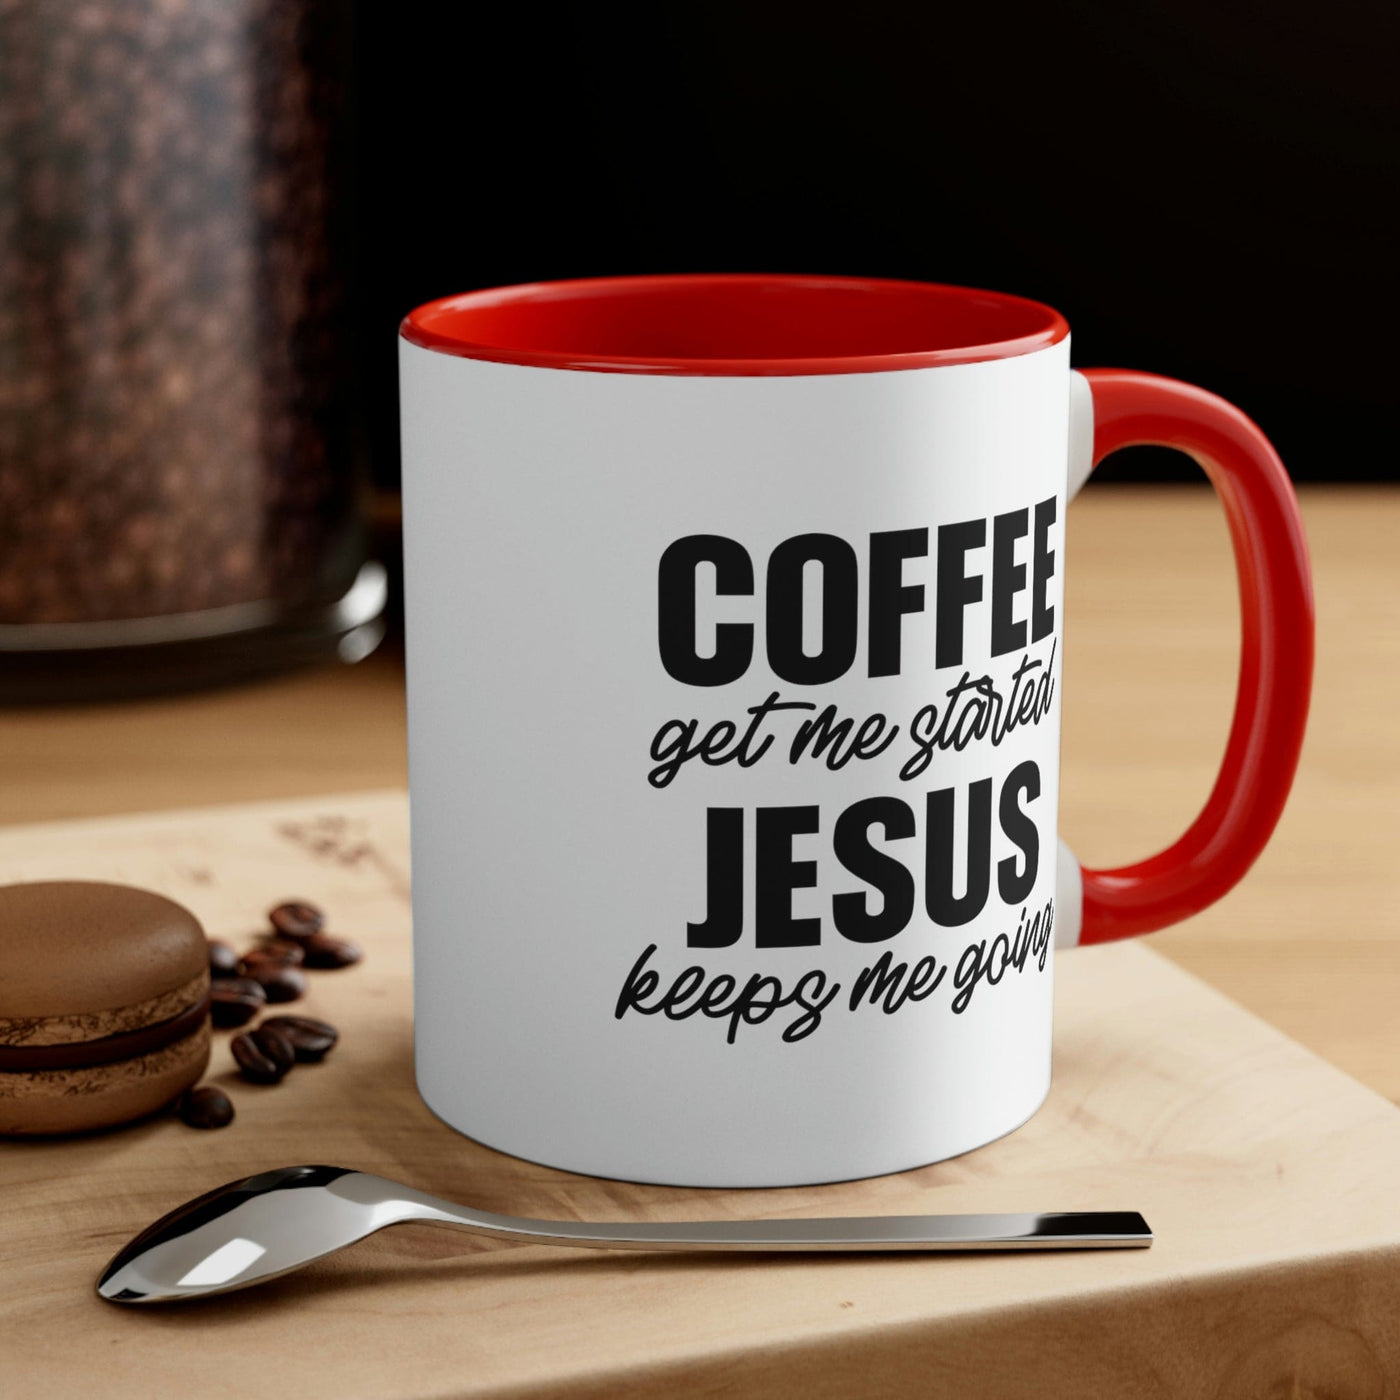 Two-tone Accent Ceramic Mug 11oz Coffee Get Me Started Jesus Keeps Me Going